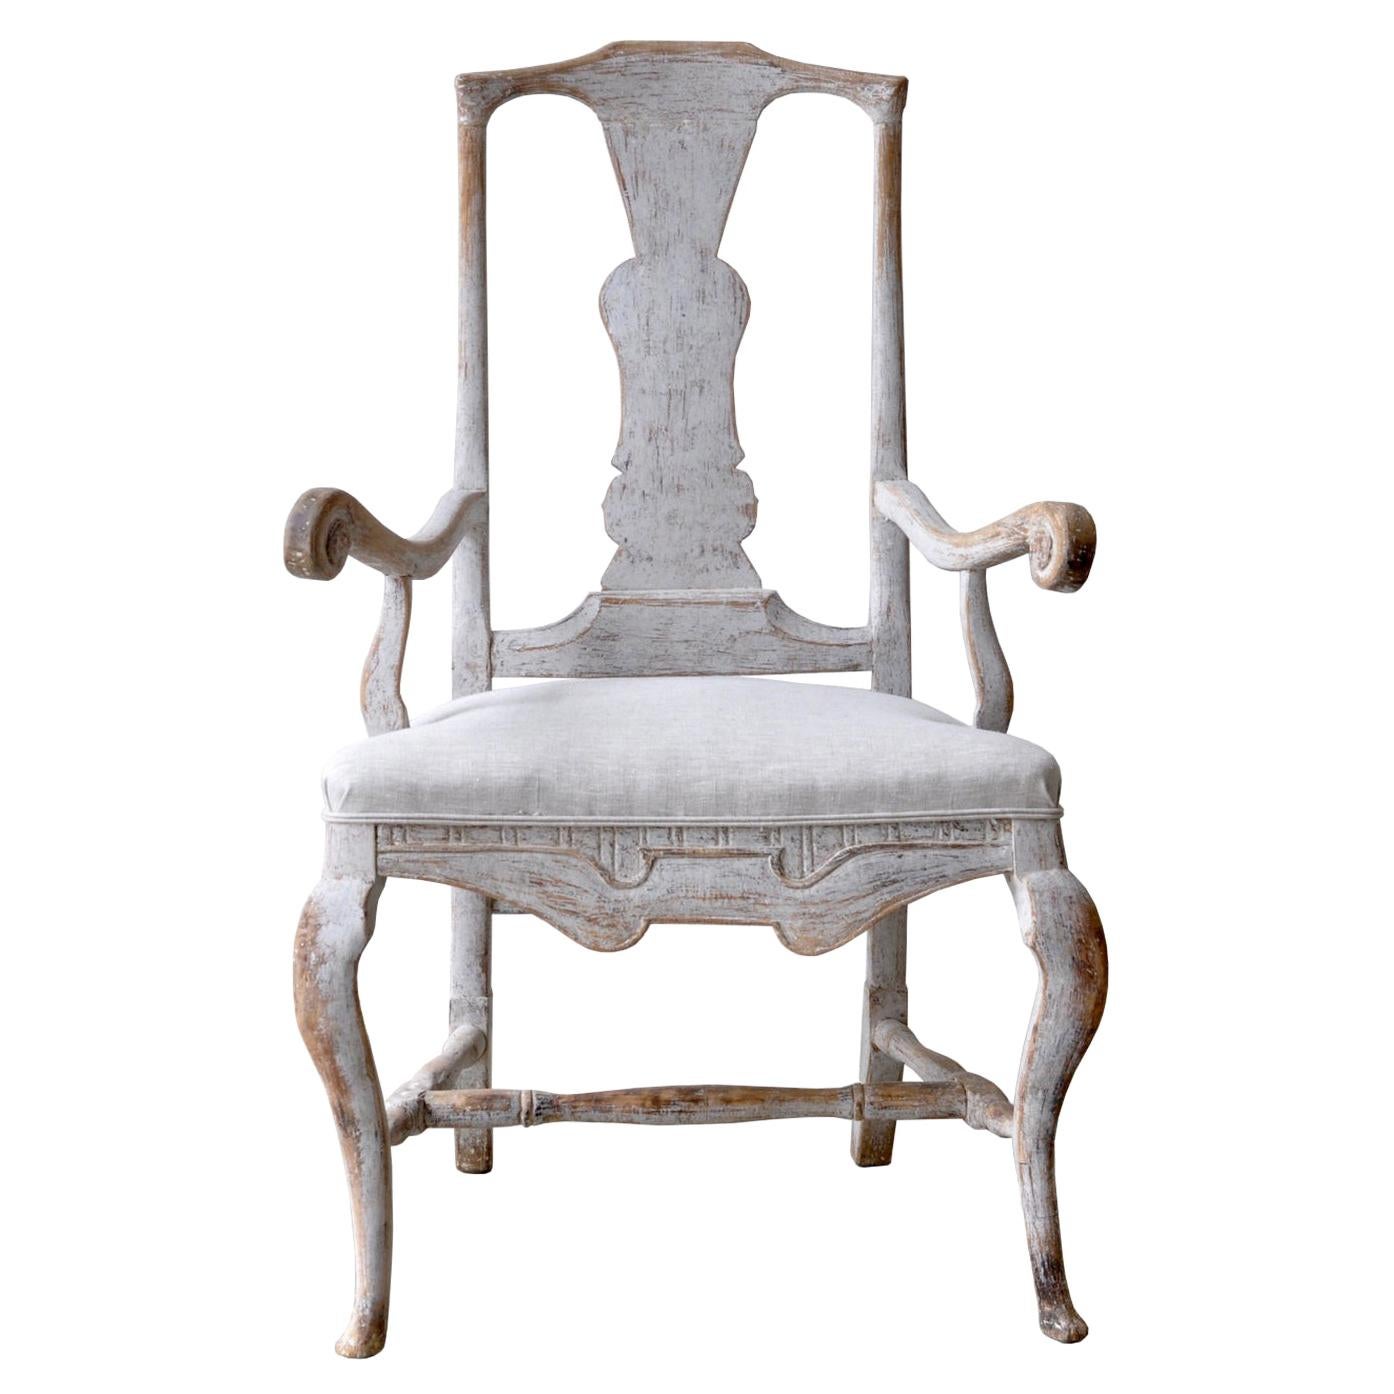 Large Period Baroque Arm Chair